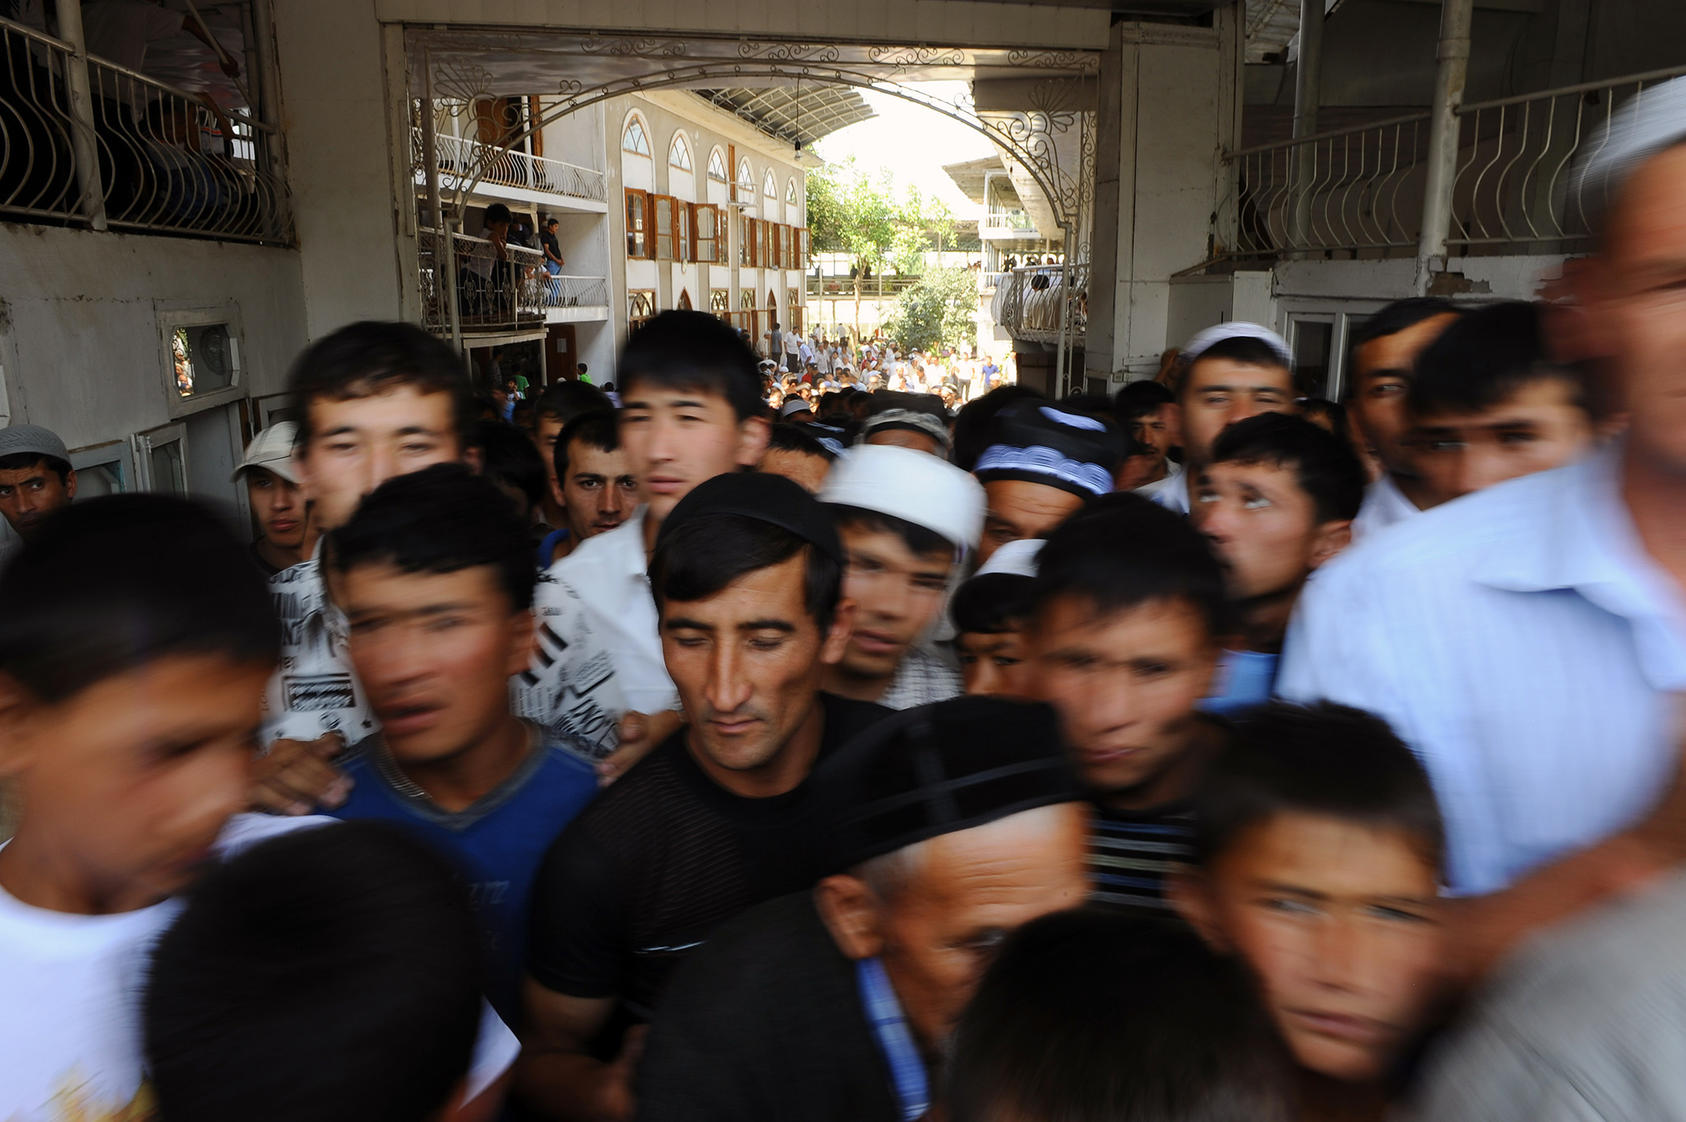 Men and boys leave a mosque in Kyrgyzstan’s border town of Kara-Suu, where residents protested in April amid land disputes with Uzbekistan. Those nations, plus Tajikistan, have had violent clashes at their disputed borders. (James Hill/The New York Times)